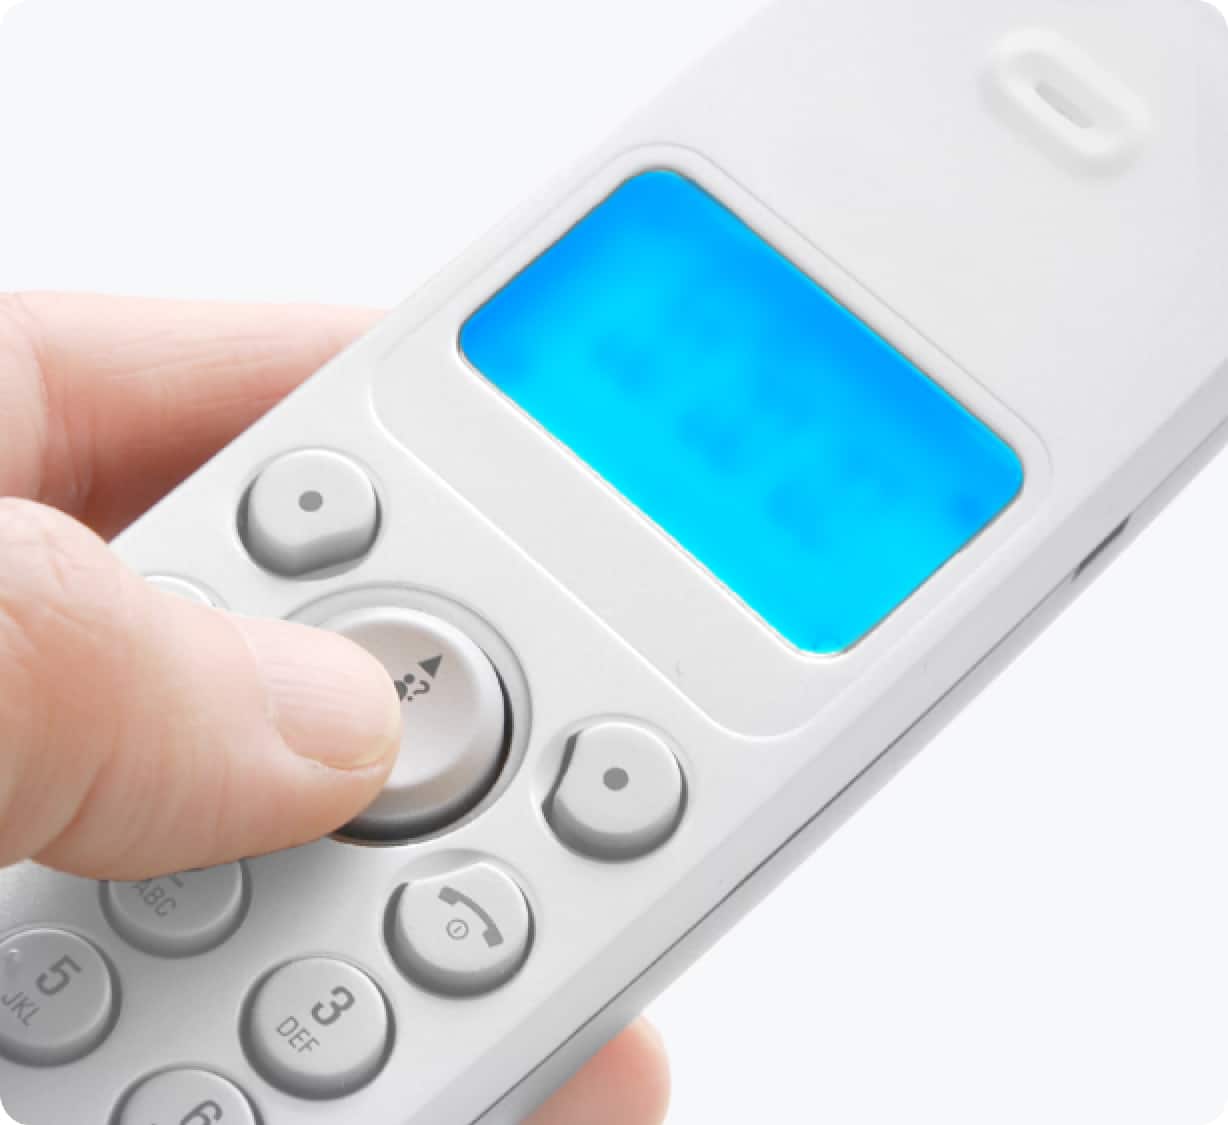 Image of a typical desktop cordless home phone unit